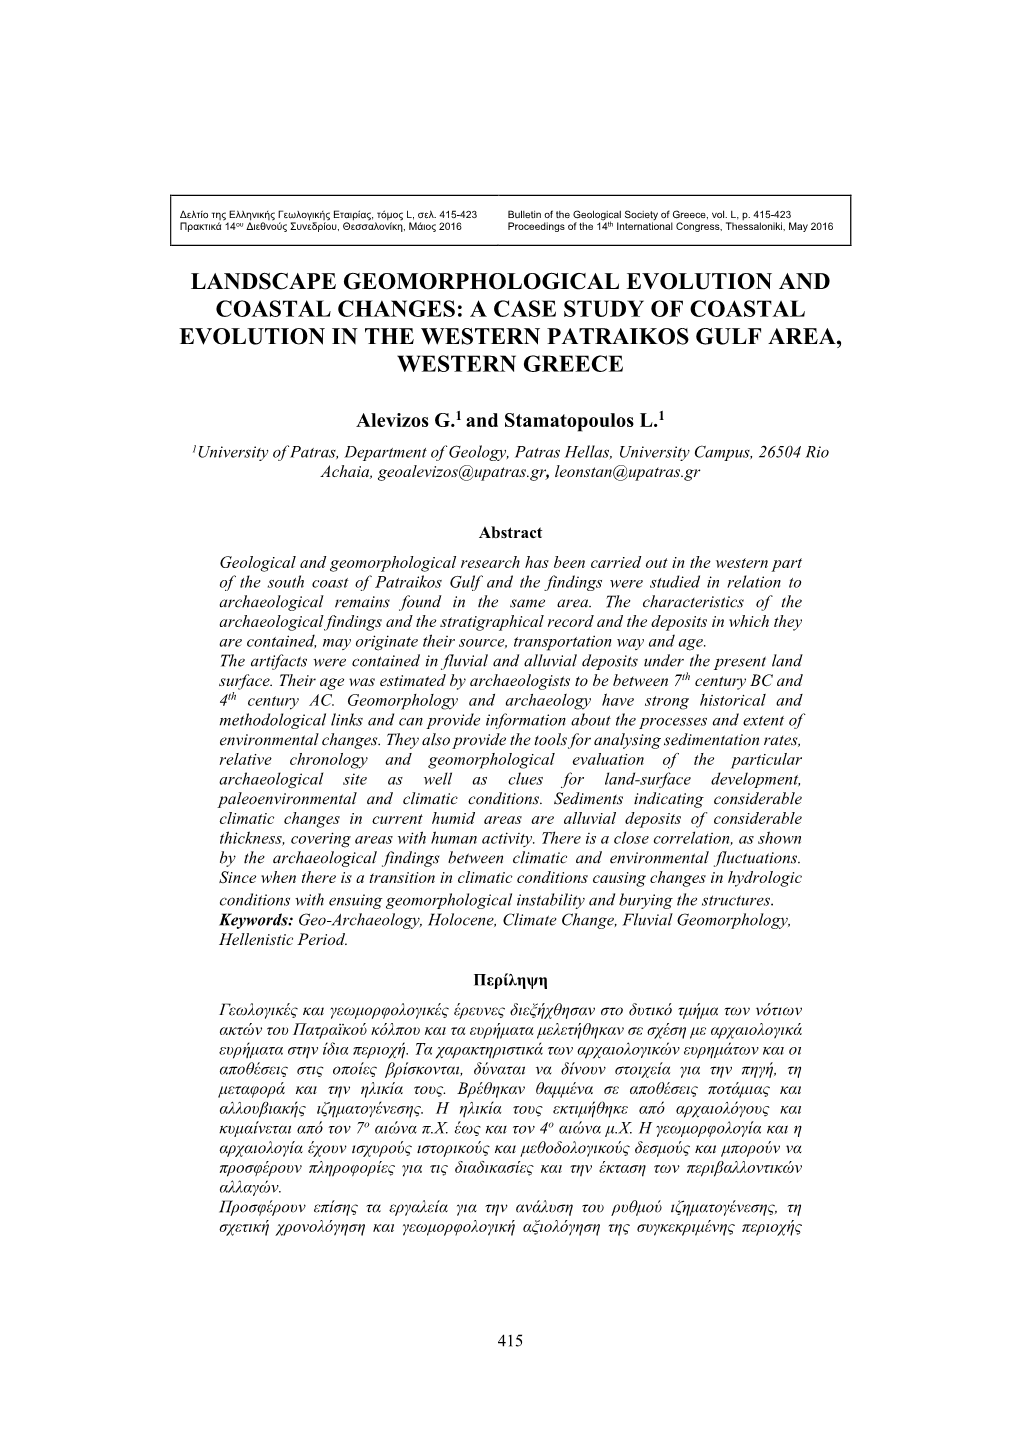 Landscape Geomorphological Evolution and Coastal Changes: a Case Study of Coastal Evolution in the Western Patraikos Gulf Area, Western Greece